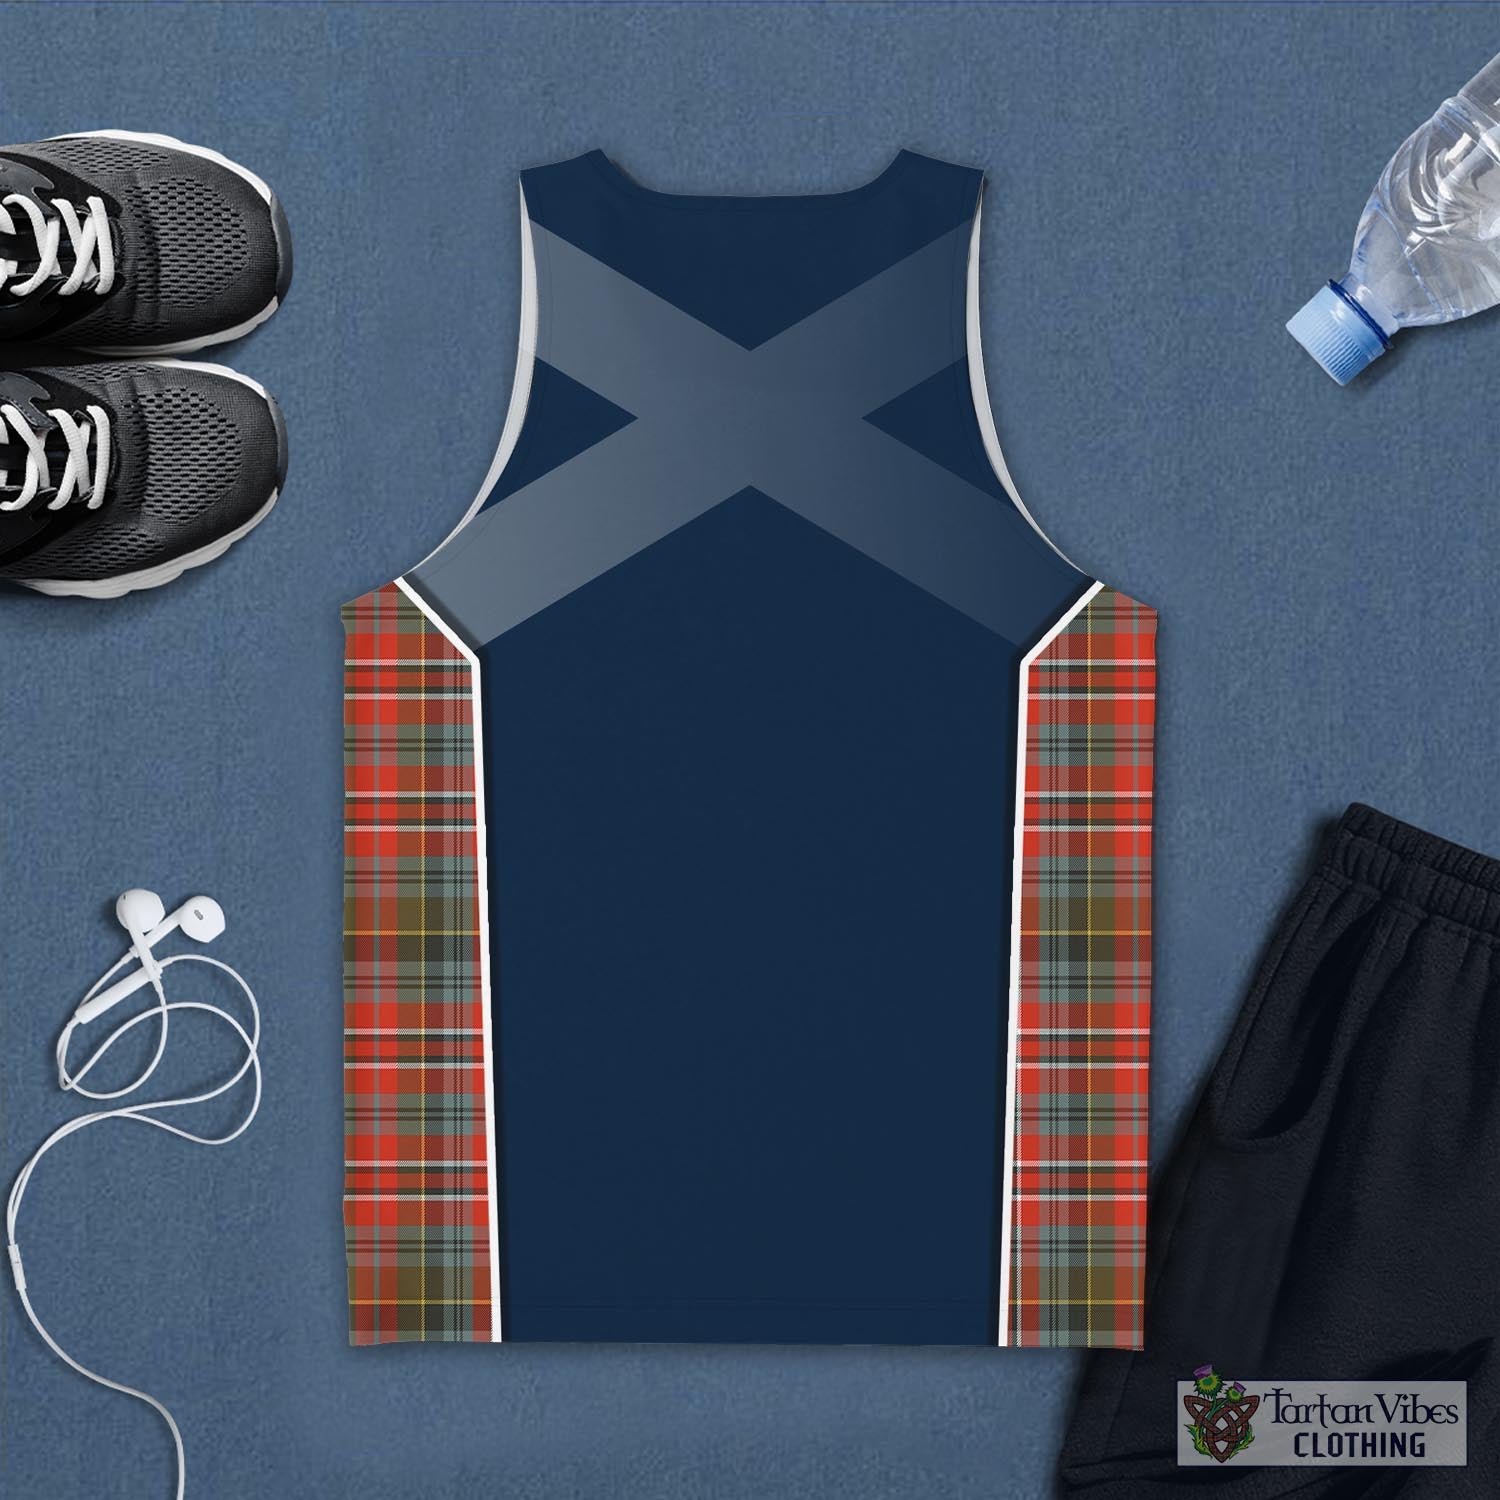 Tartan Vibes Clothing MacPherson Weathered Tartan Men's Tanks Top with Family Crest and Scottish Thistle Vibes Sport Style